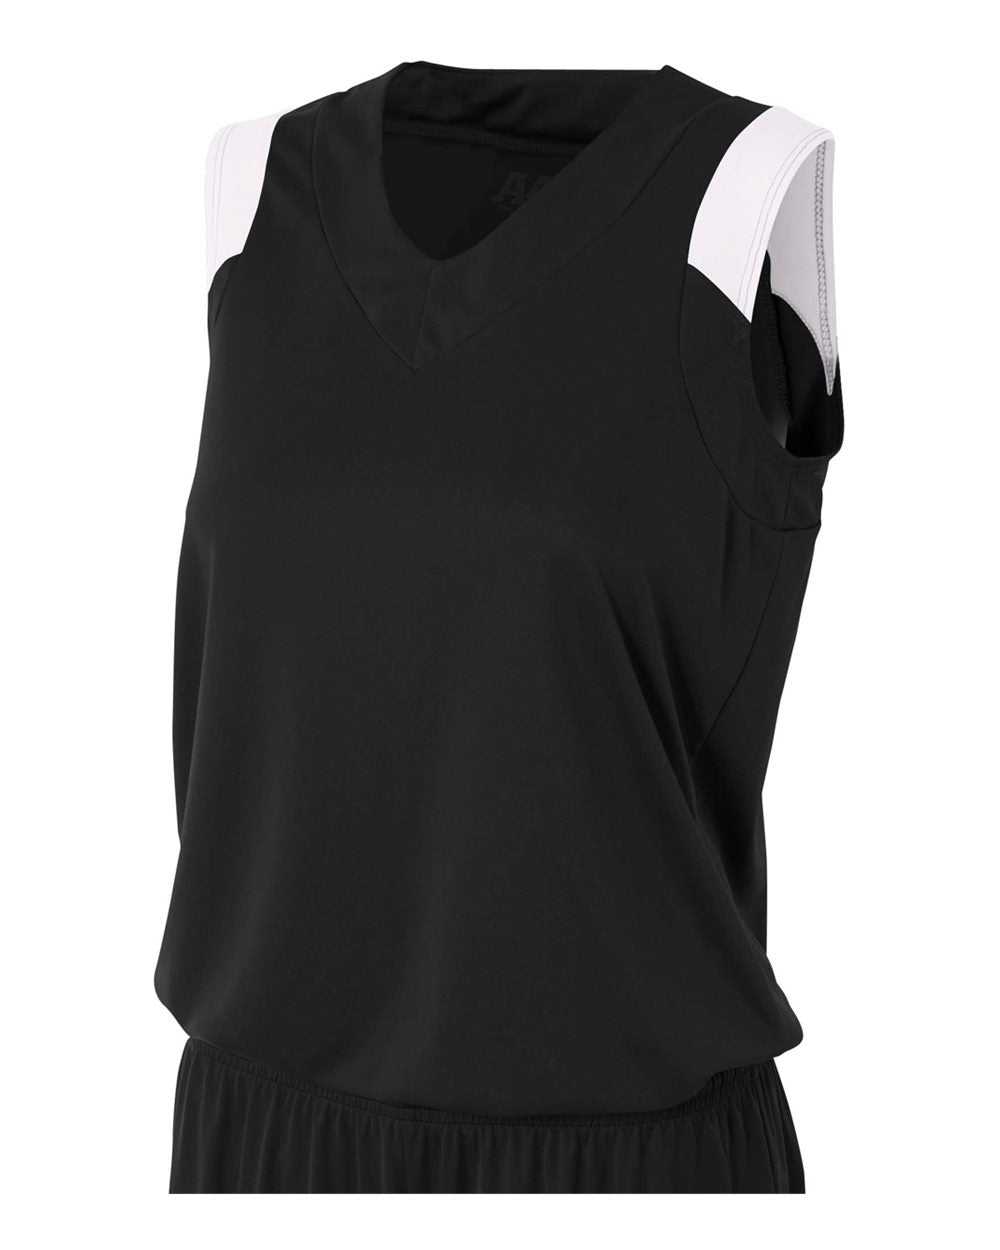 A4 NW2340 Women's Moisture Management V-Neck Muscle - Black White - HIT a Double